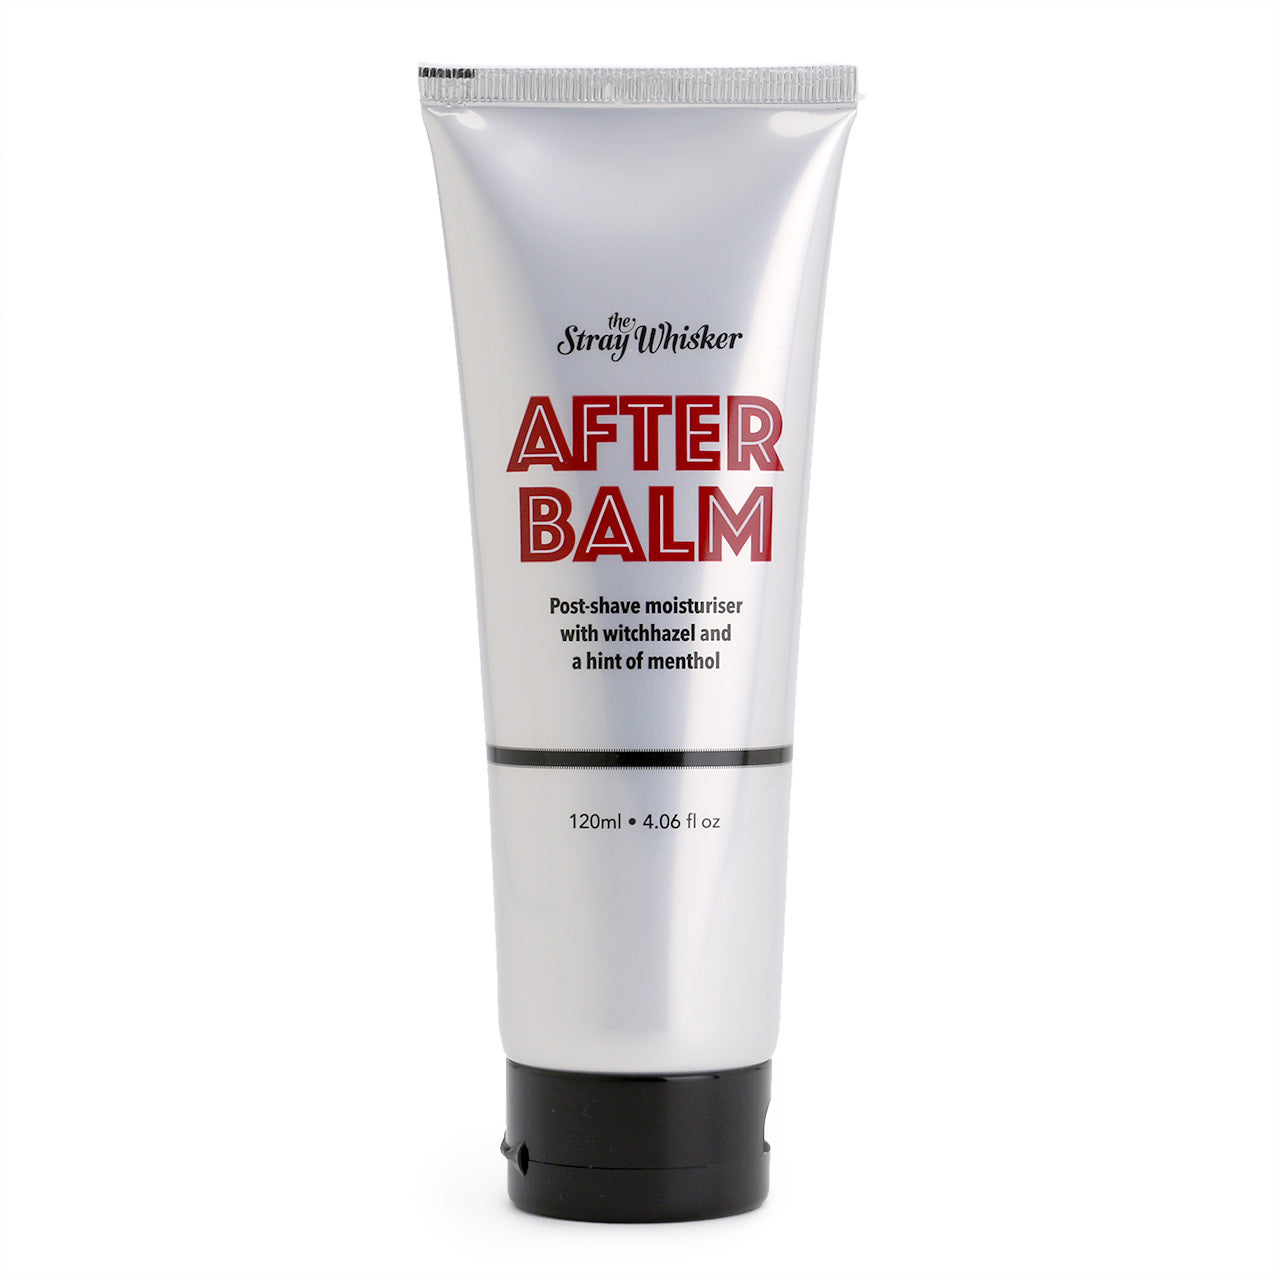 After Balm Post Shave Moisturiser - 120ml | The Stray Whisker | Reviews ...